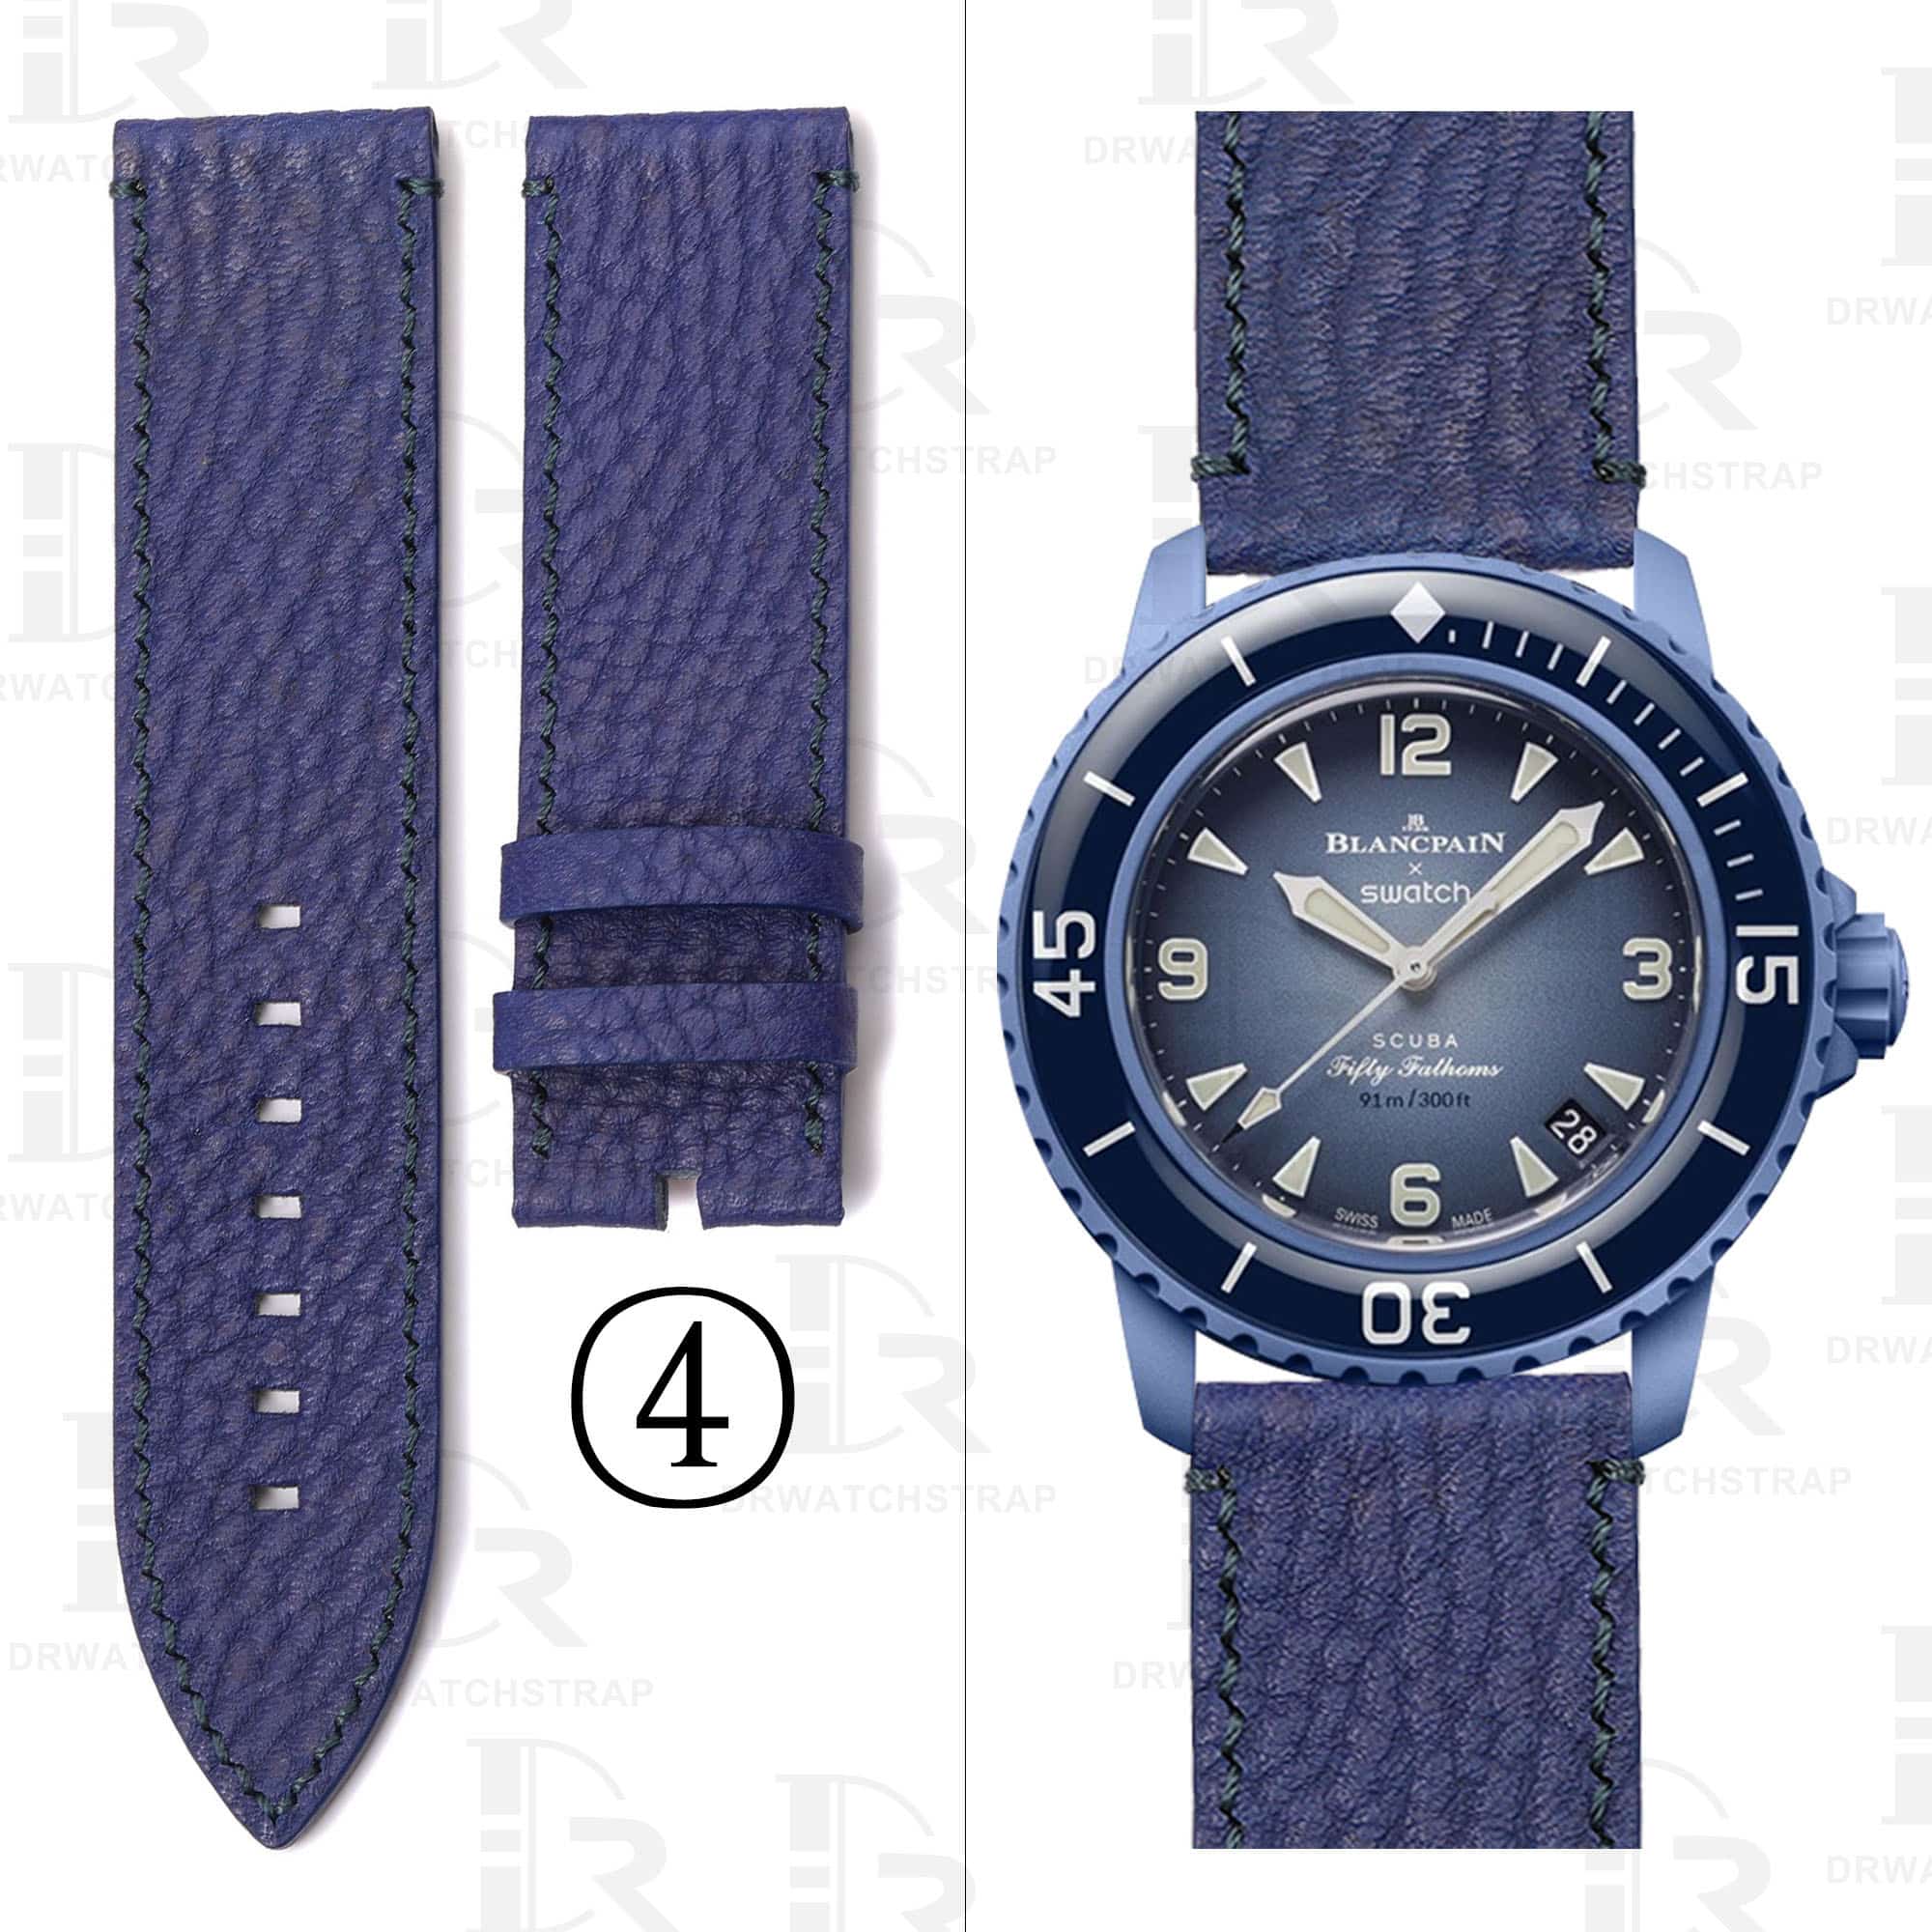 Buy Custom Blancpain x Swatch leather strap 22mm Blue Calfskin leather watch band